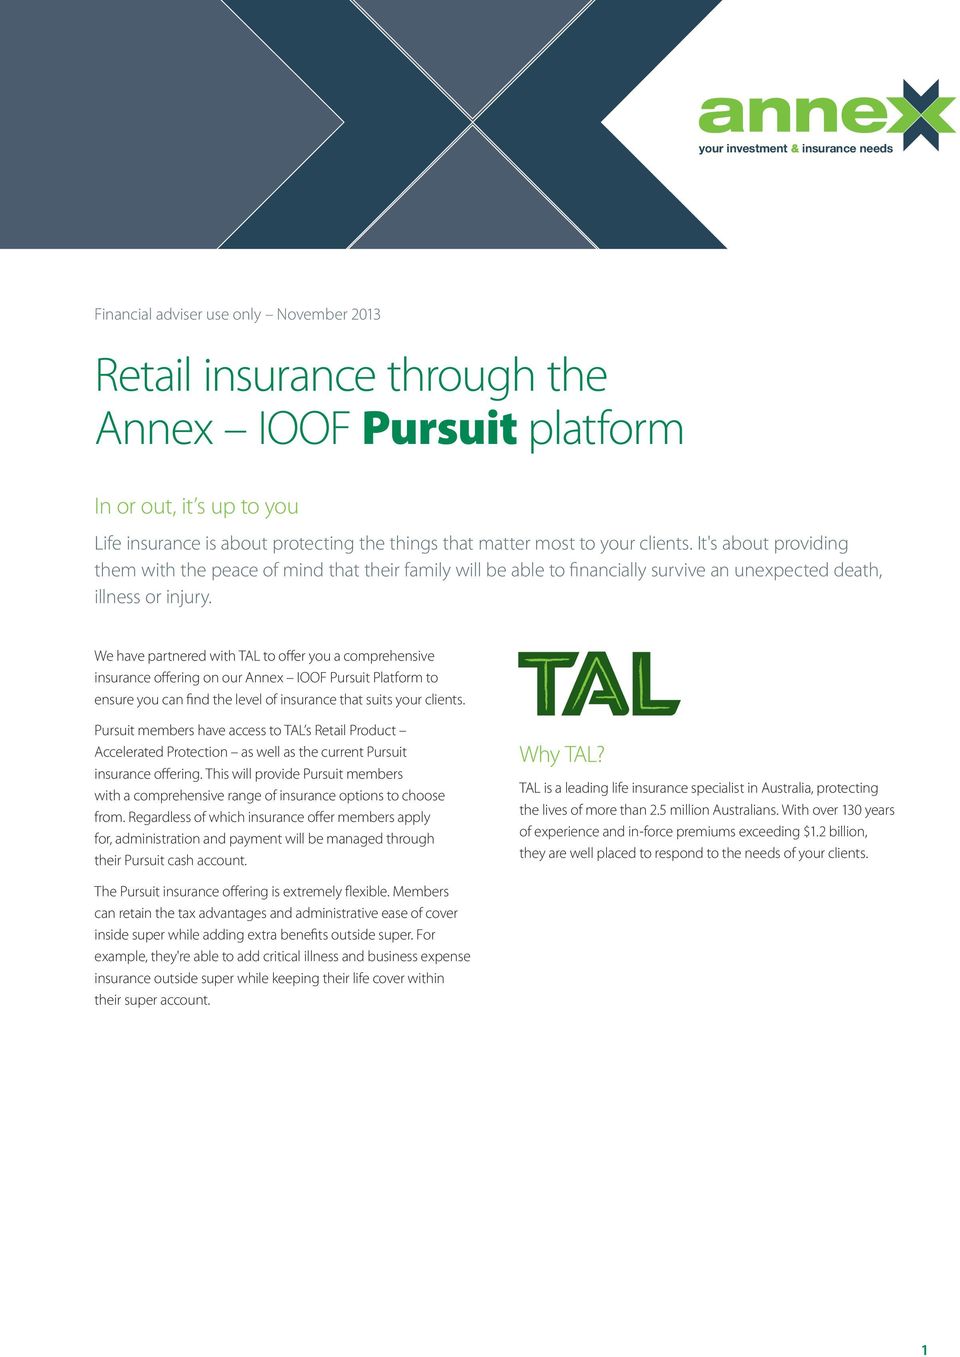 We have partnered with TAL to offer you a comprehensive insurance offering on our Annex IOOF Pursuit Platform to ensure you can find the level of insurance that suits your clients.